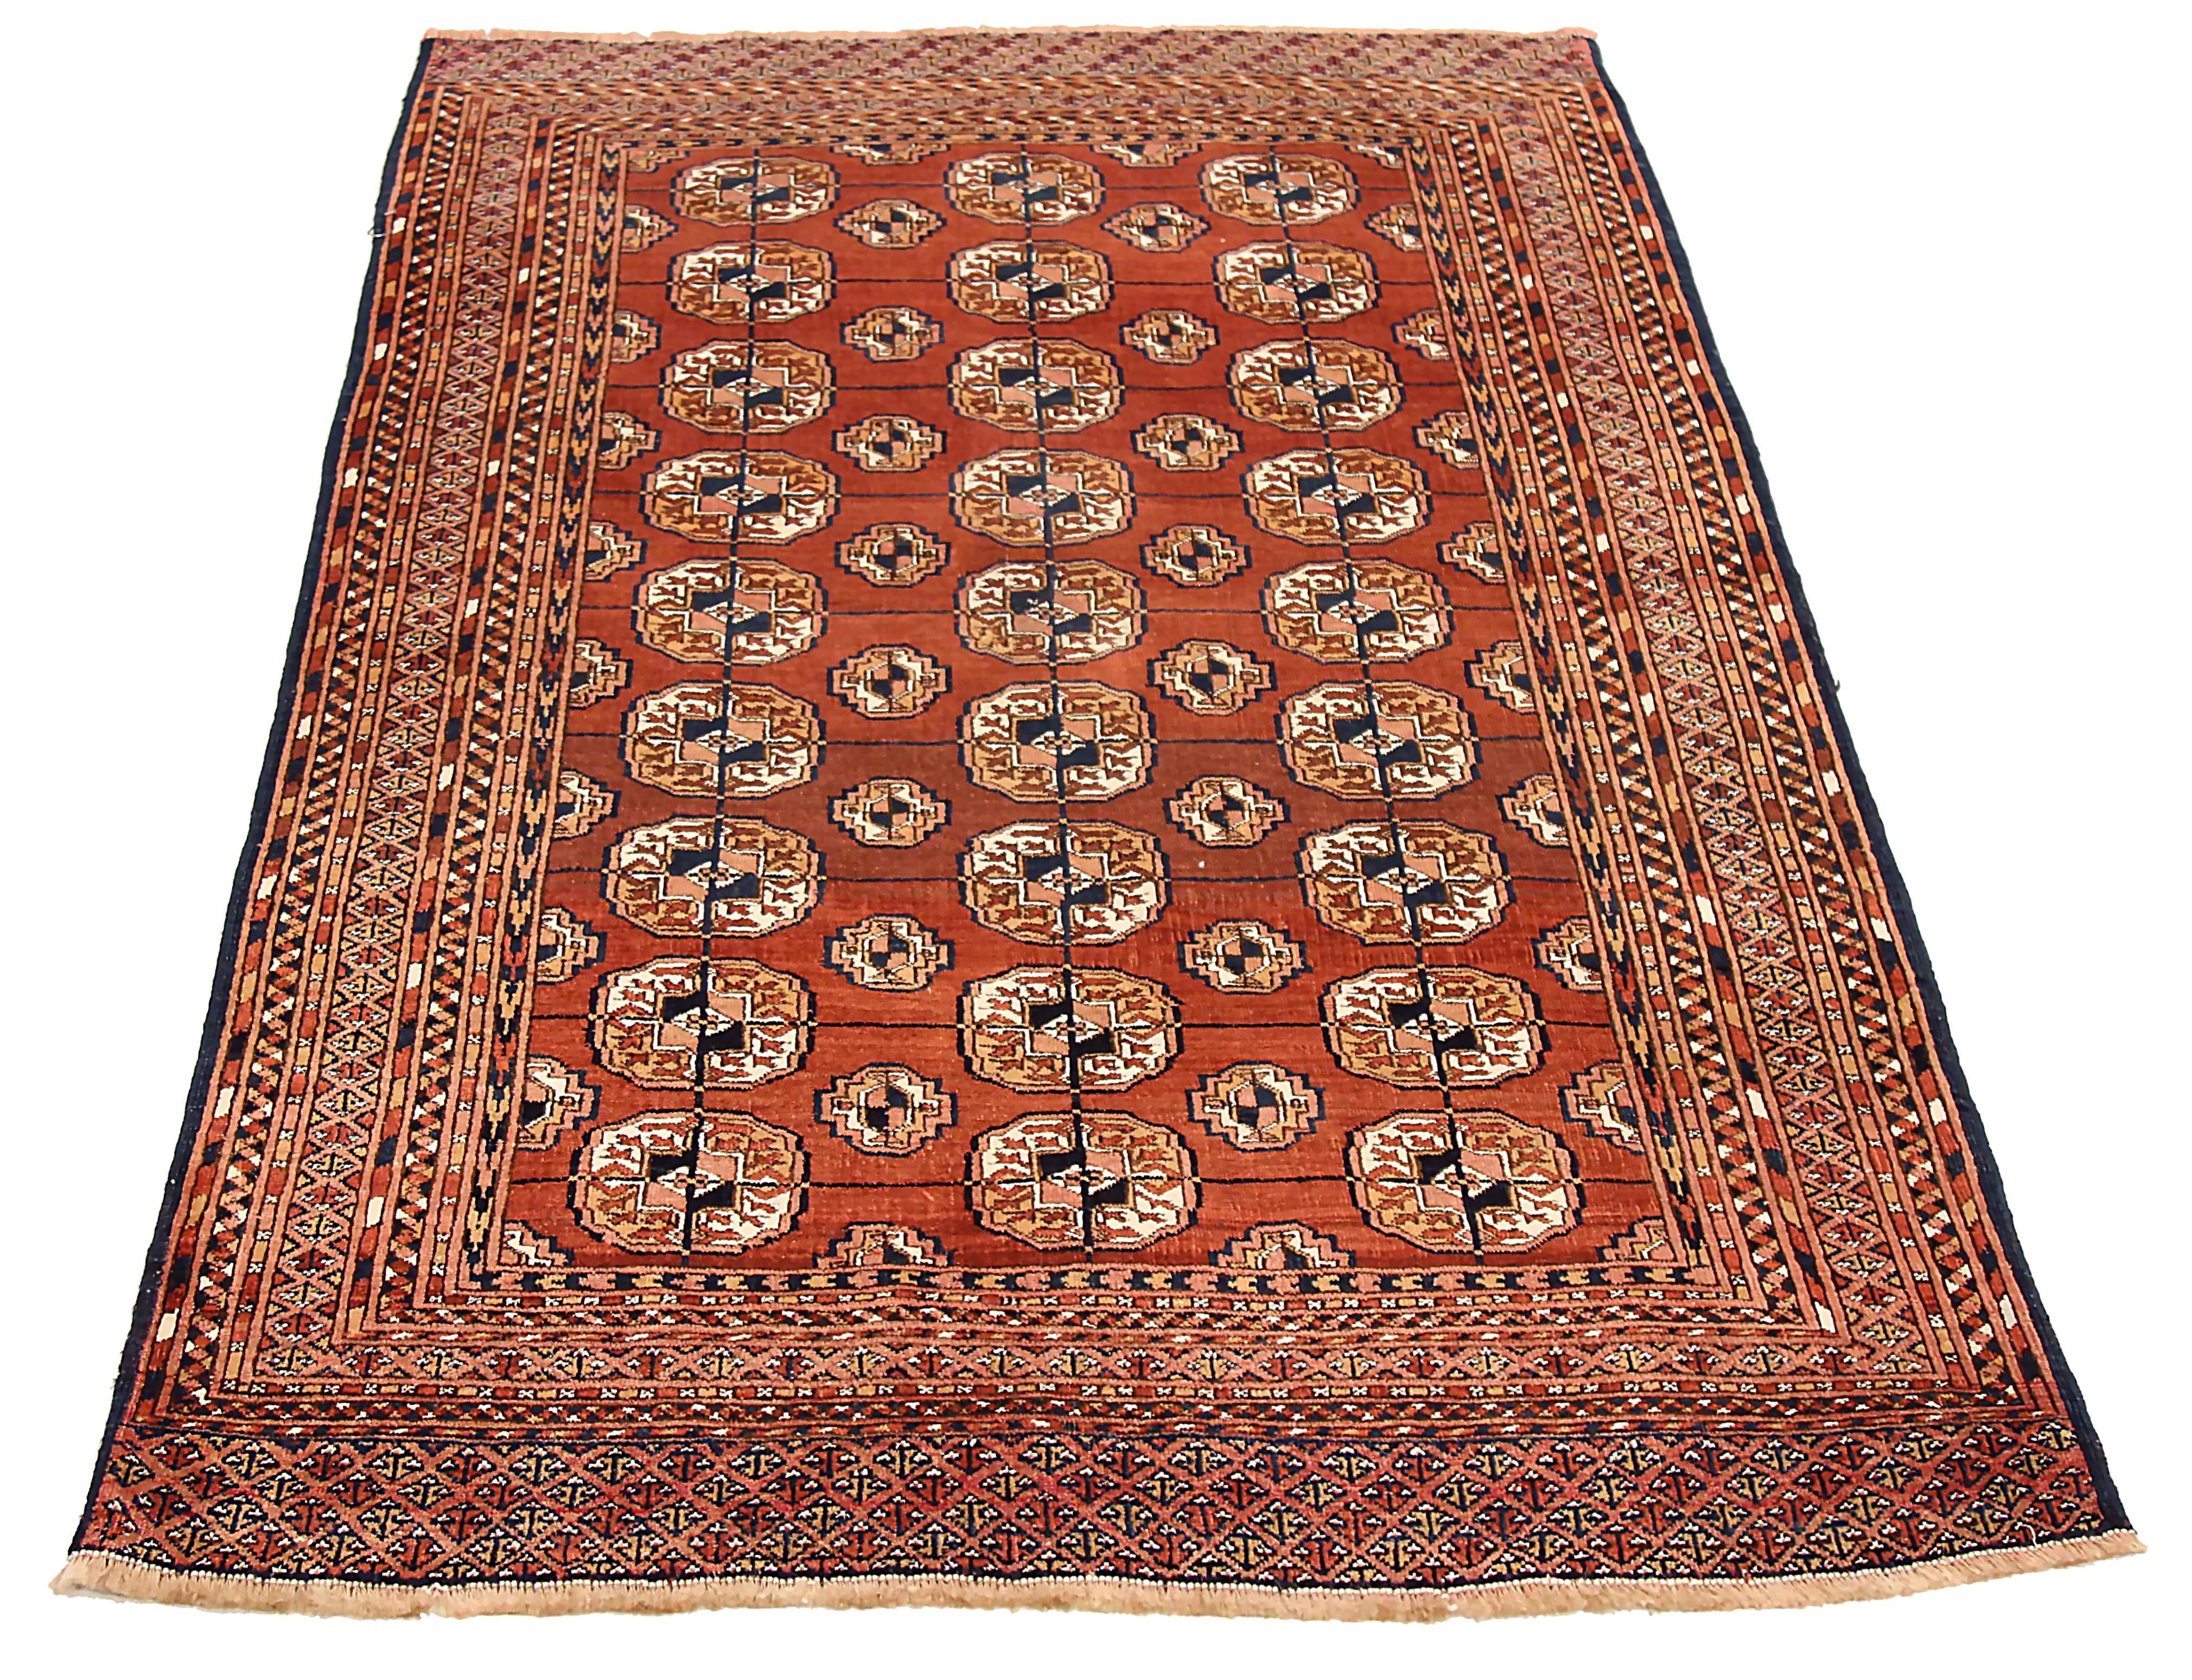 Antique Persian area rug handwoven from the finest sheep’s wool. It’s colored with all-natural vegetable dyes that are safe for humans and pets. It’s a traditional Turkeman design handwoven by expert artisans. It’s a lovely area rug that can be